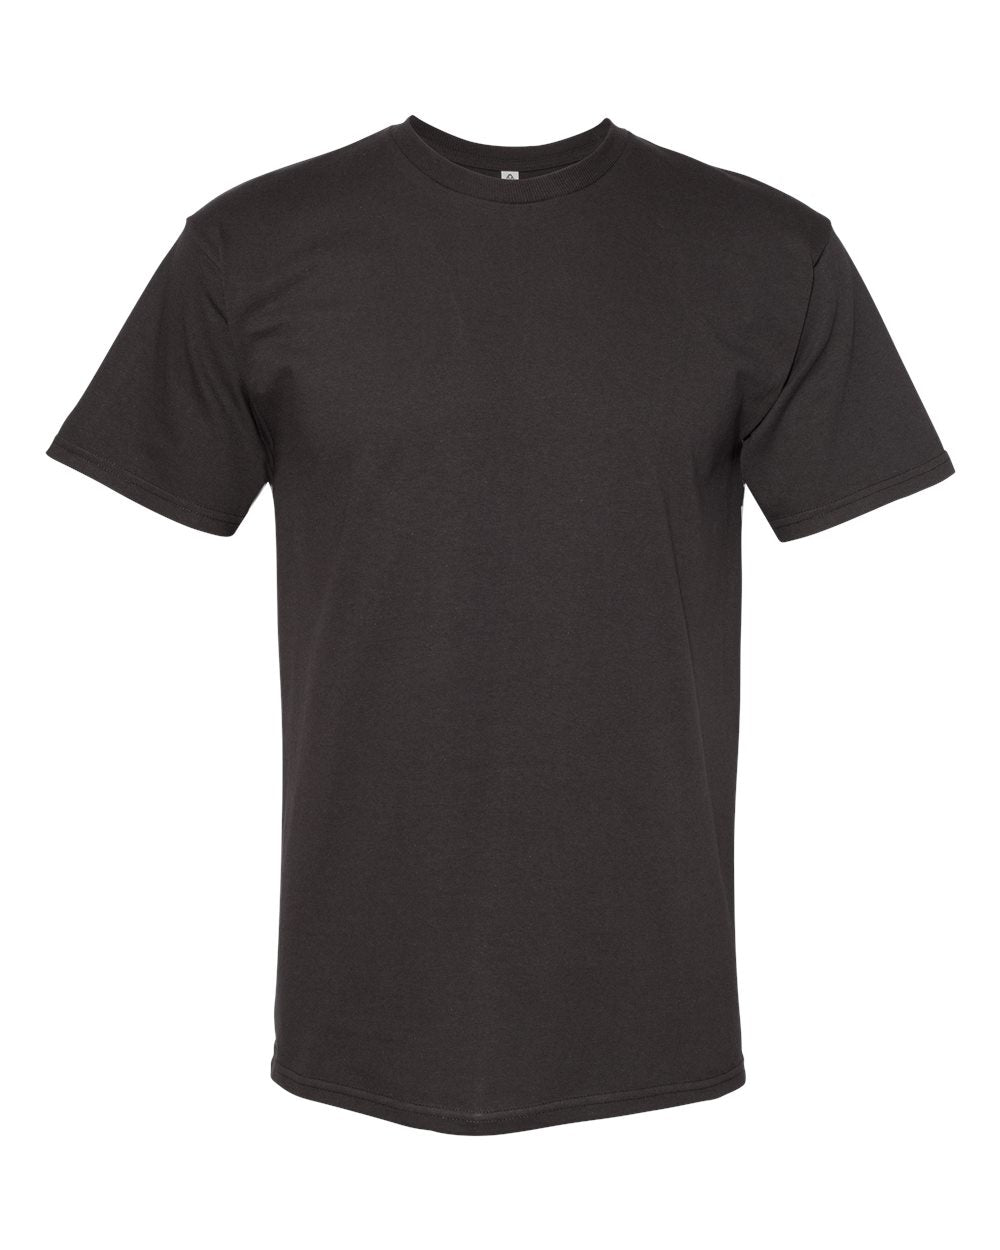 American Apparel Midweight Cotton Unisex Tee 1701 #color_Tar